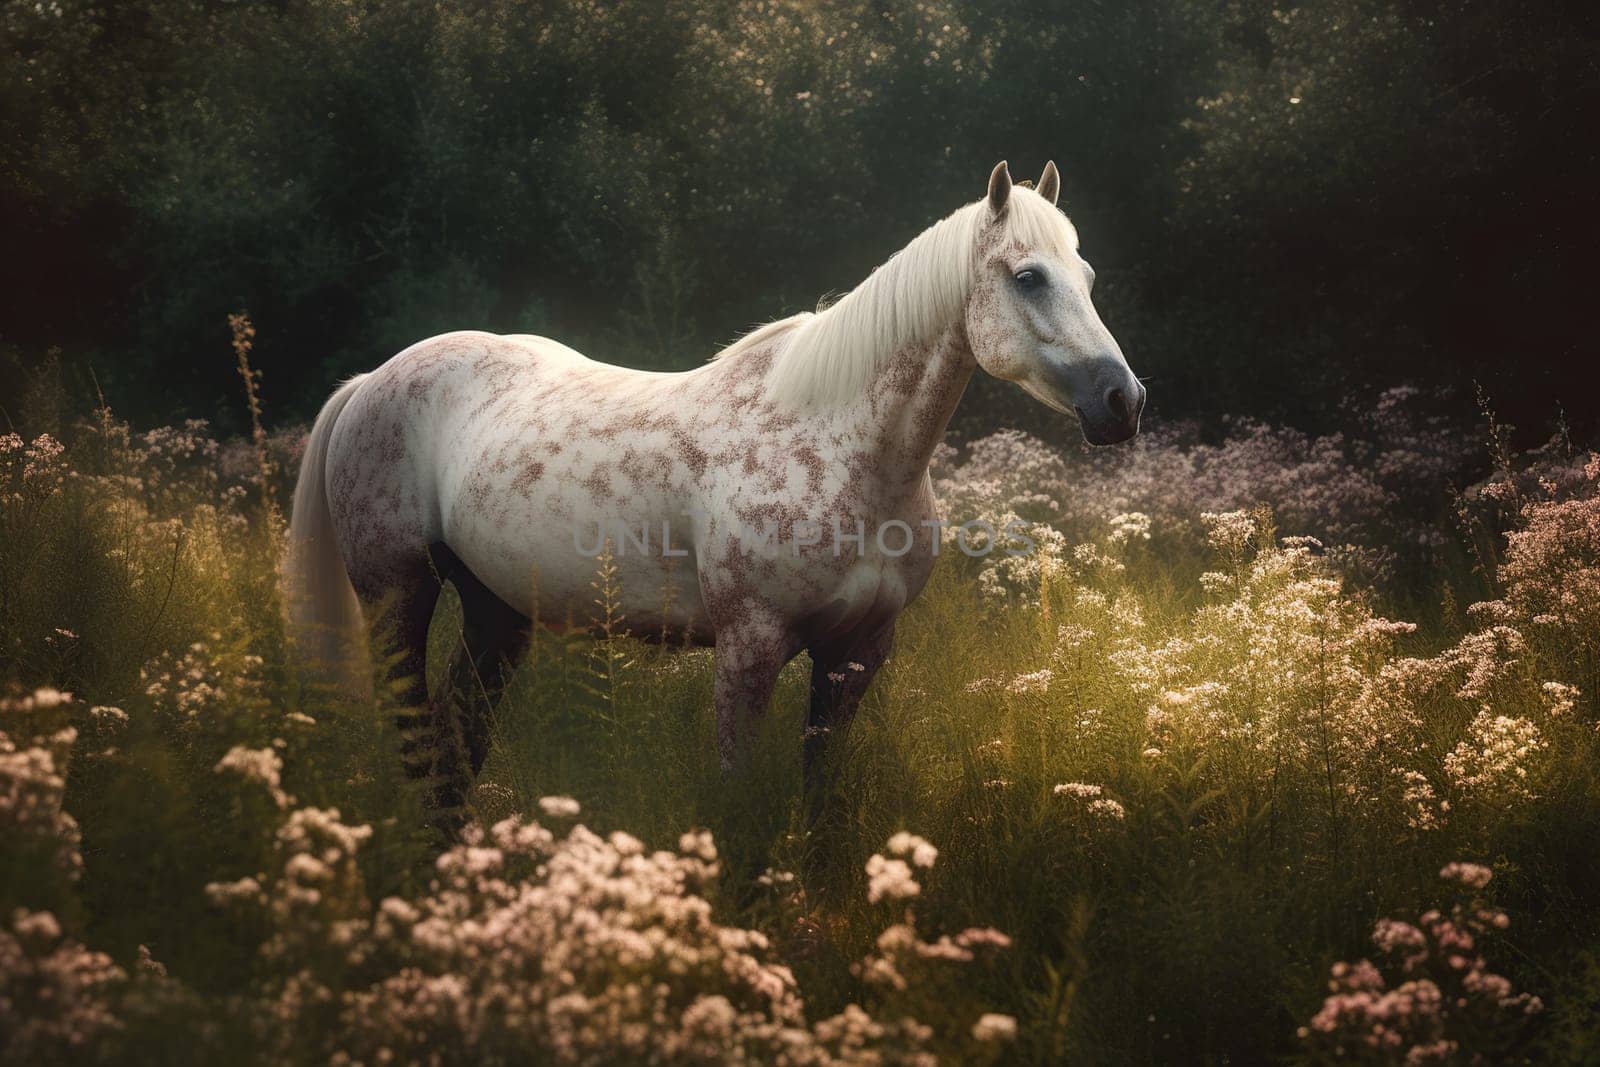 Surrounded By Wildflowers, The Horse Moves Through A Meadow Infused With An Ethereal, Almost Magical Scene